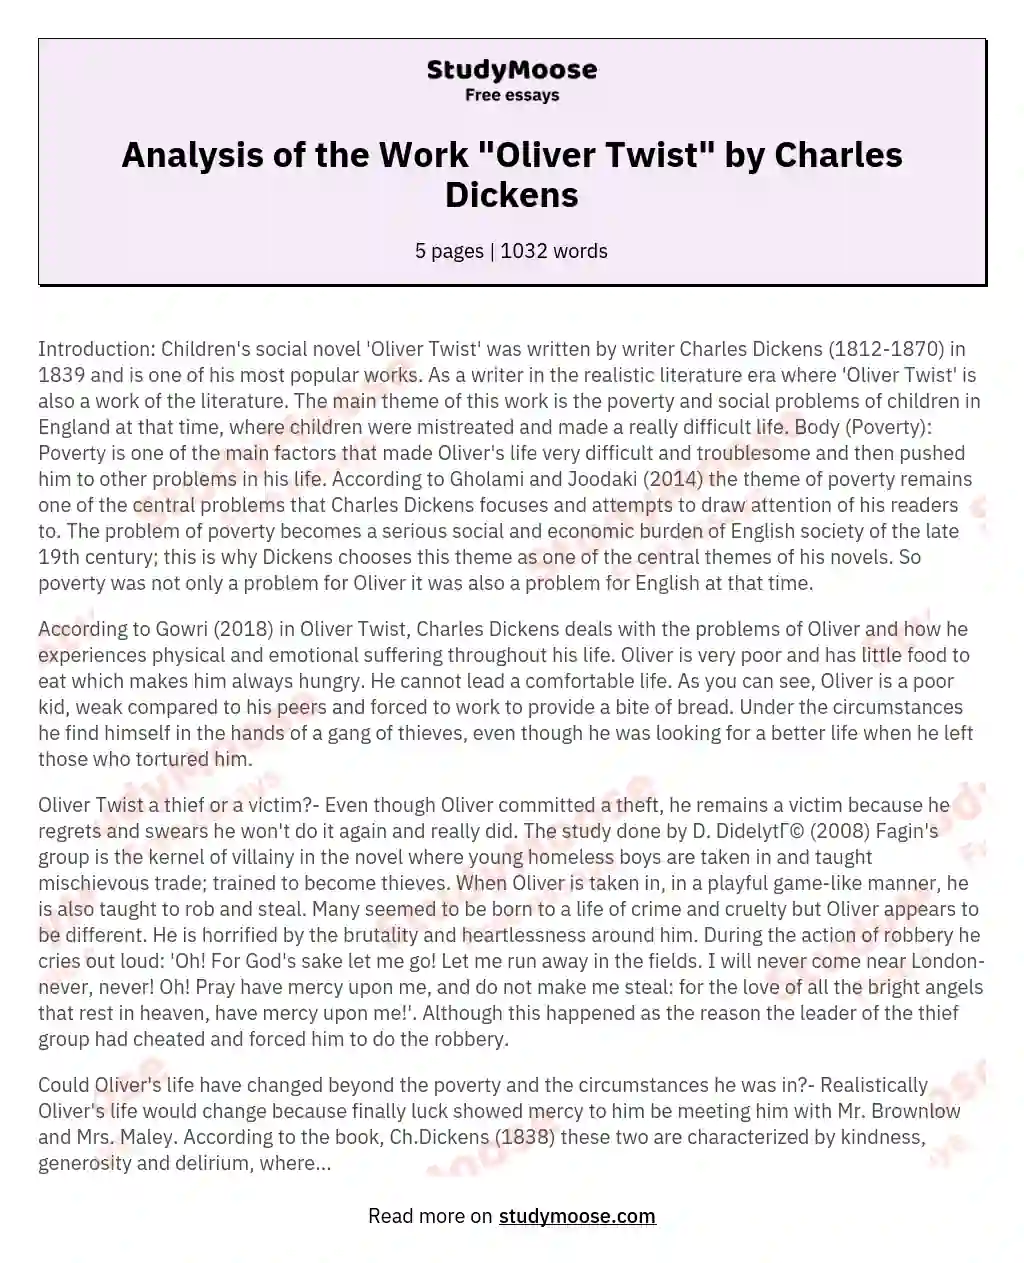 Analysis of the Work "Oliver Twist" by Charles Dickens